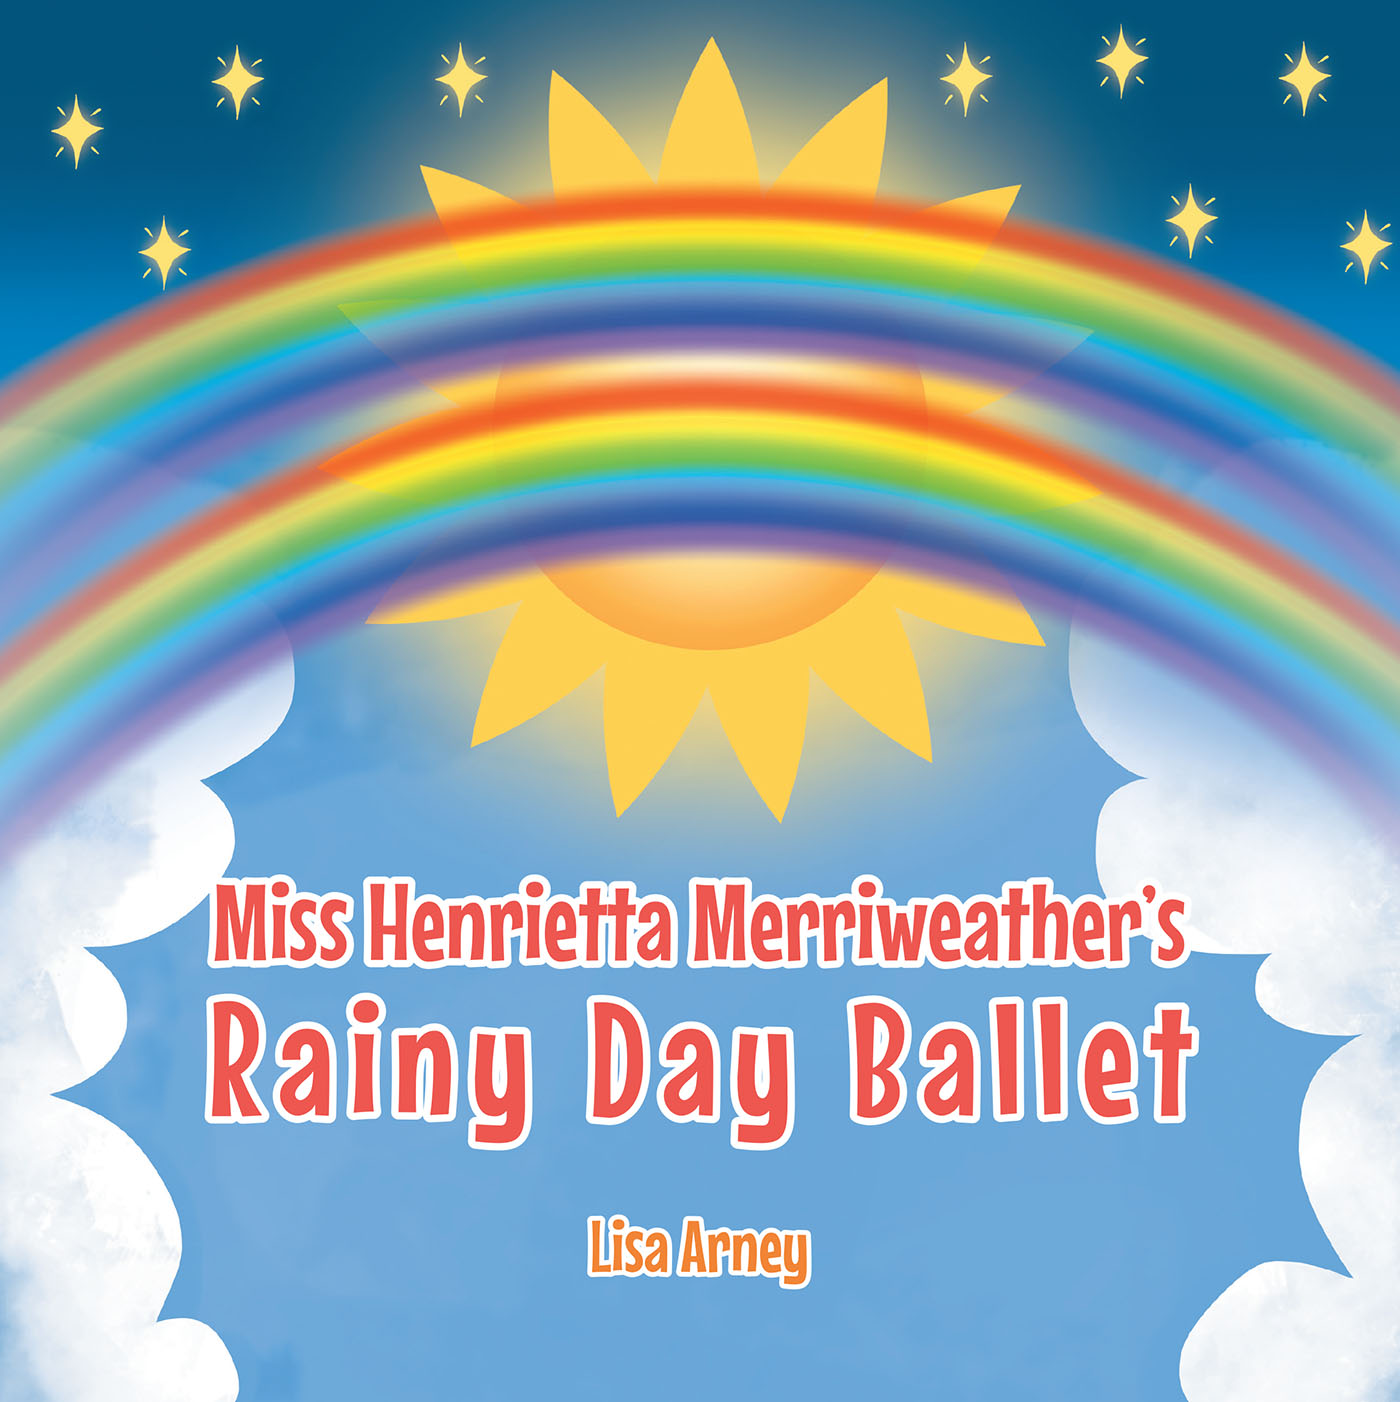 Author Lisa Arney’s New Book, "Miss Henrietta Merriweather's Rainy Day Ballet," is an Imaginative Story of a Small Flock of Chickens Who Prepare for a Grand Ballet Event